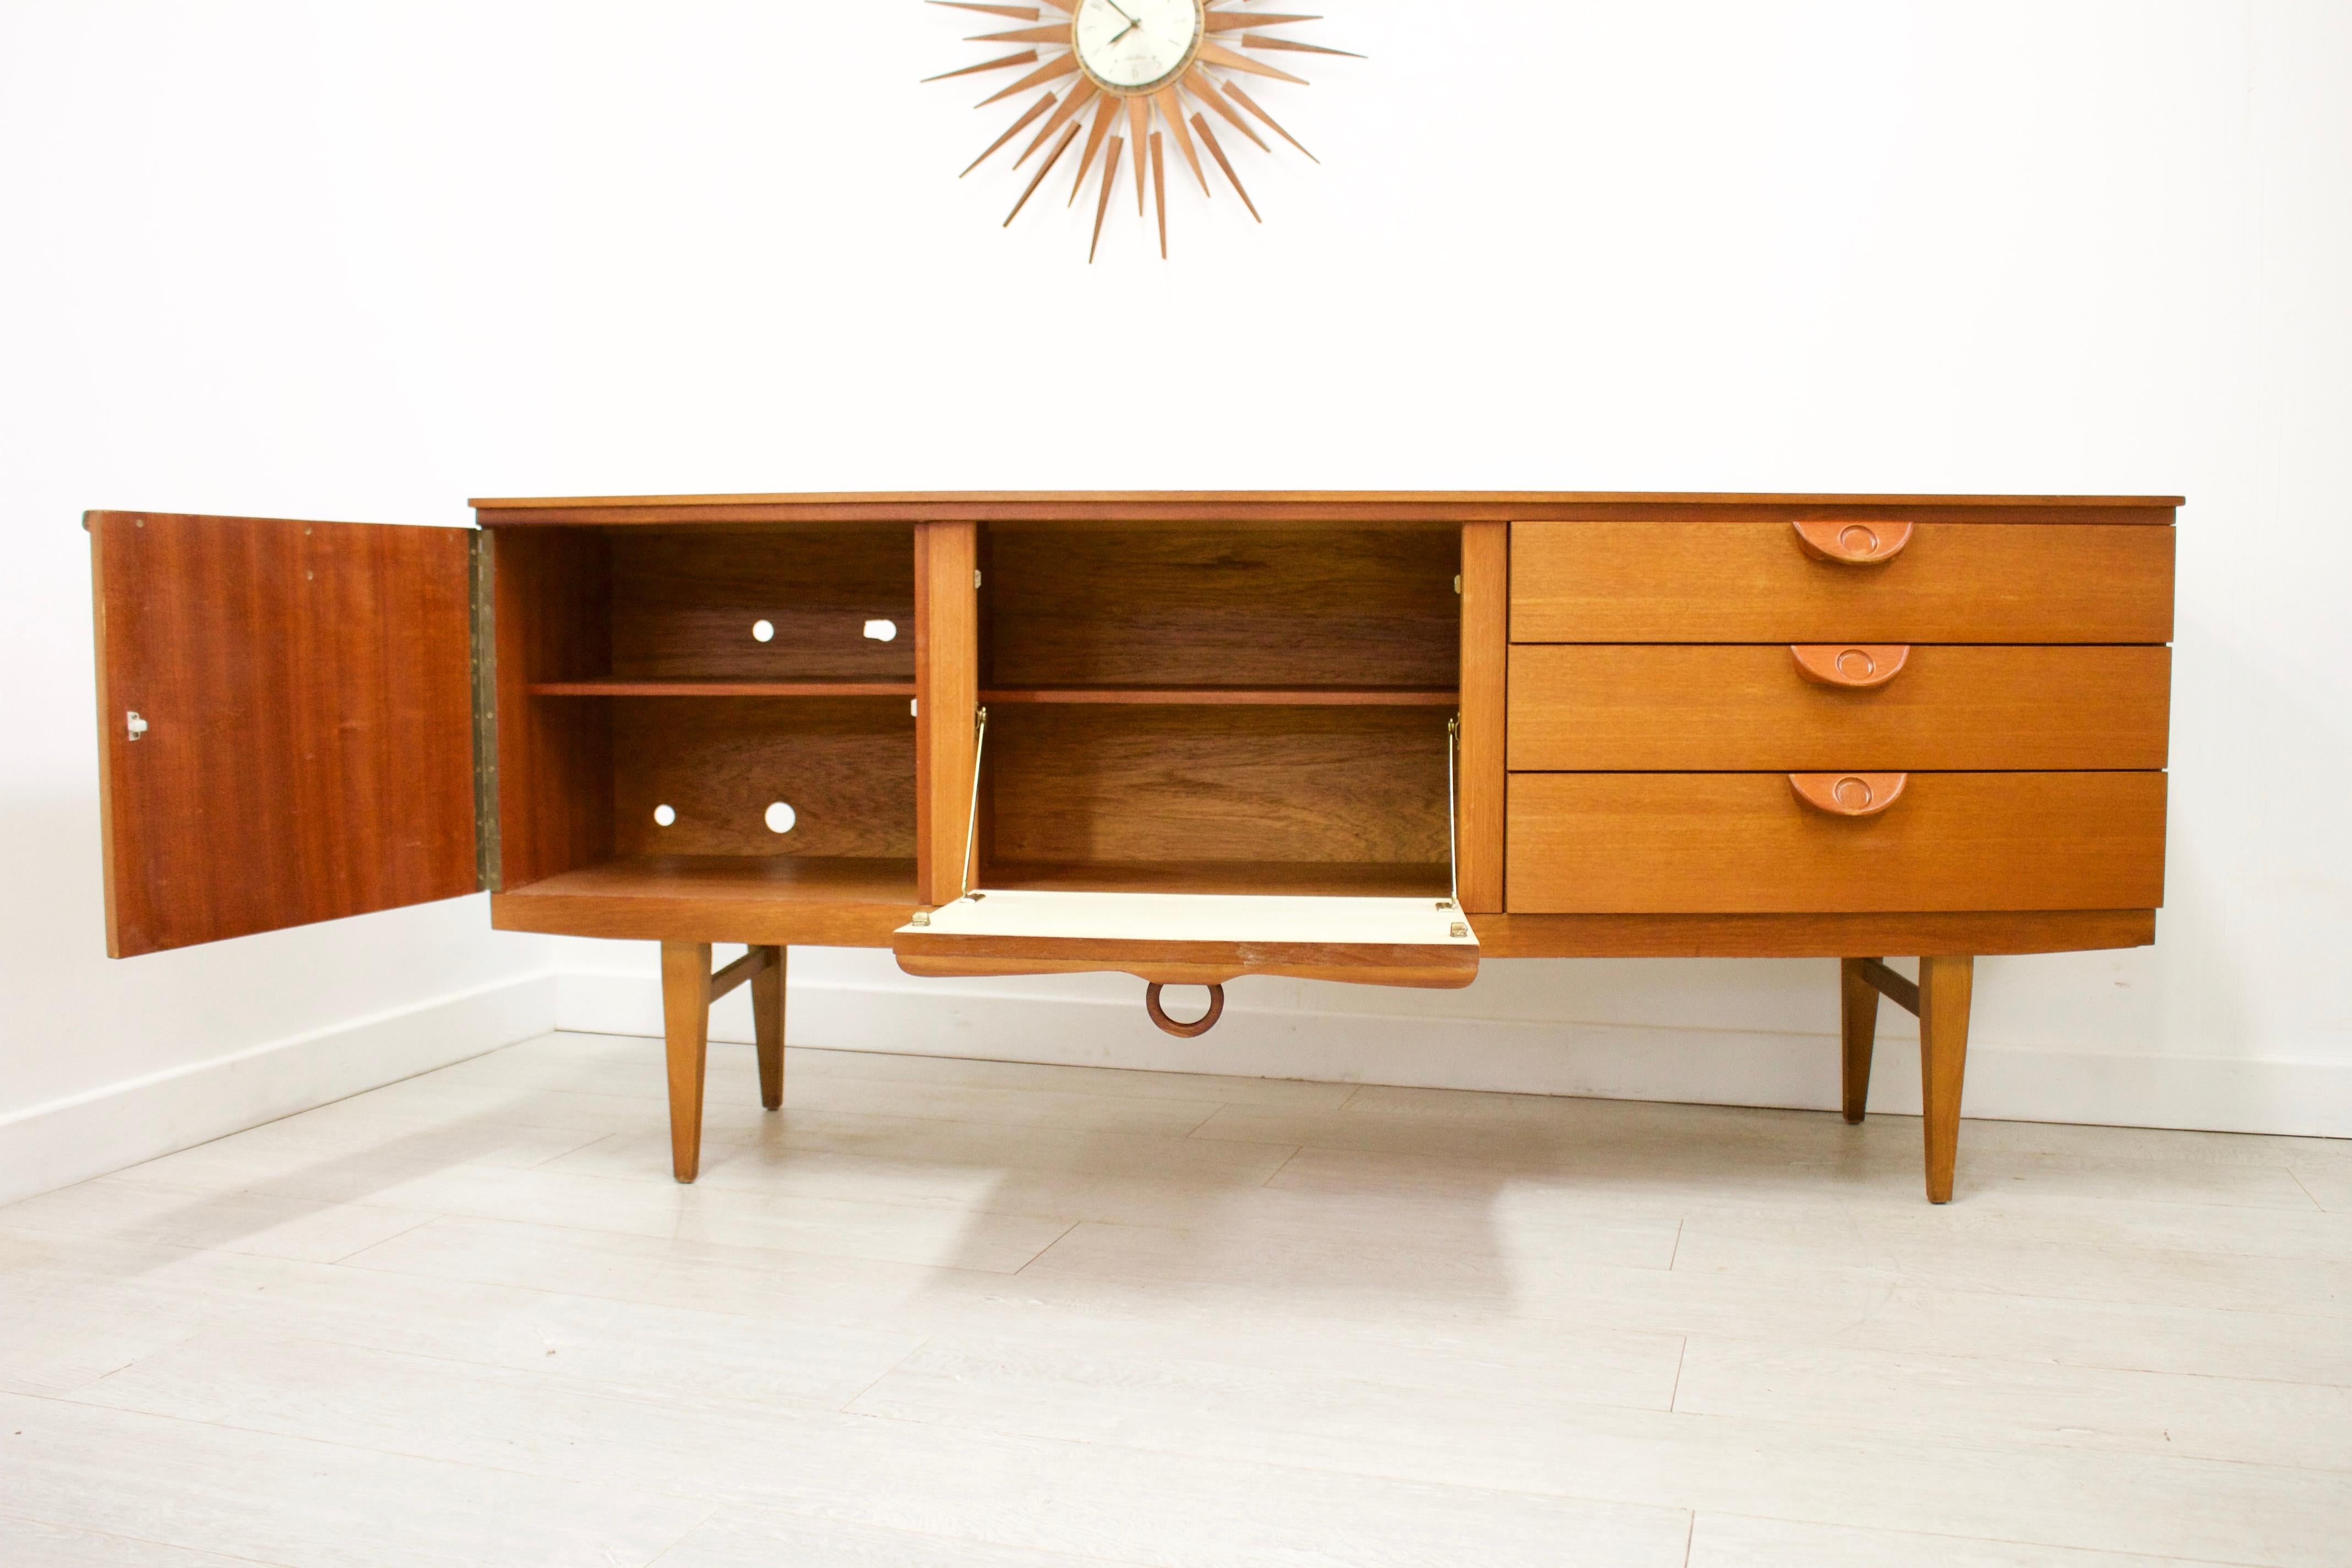 Midcentury Retro Teak Sideboard, 1960s In Good Condition For Sale In South Shields, Tyne and Wear